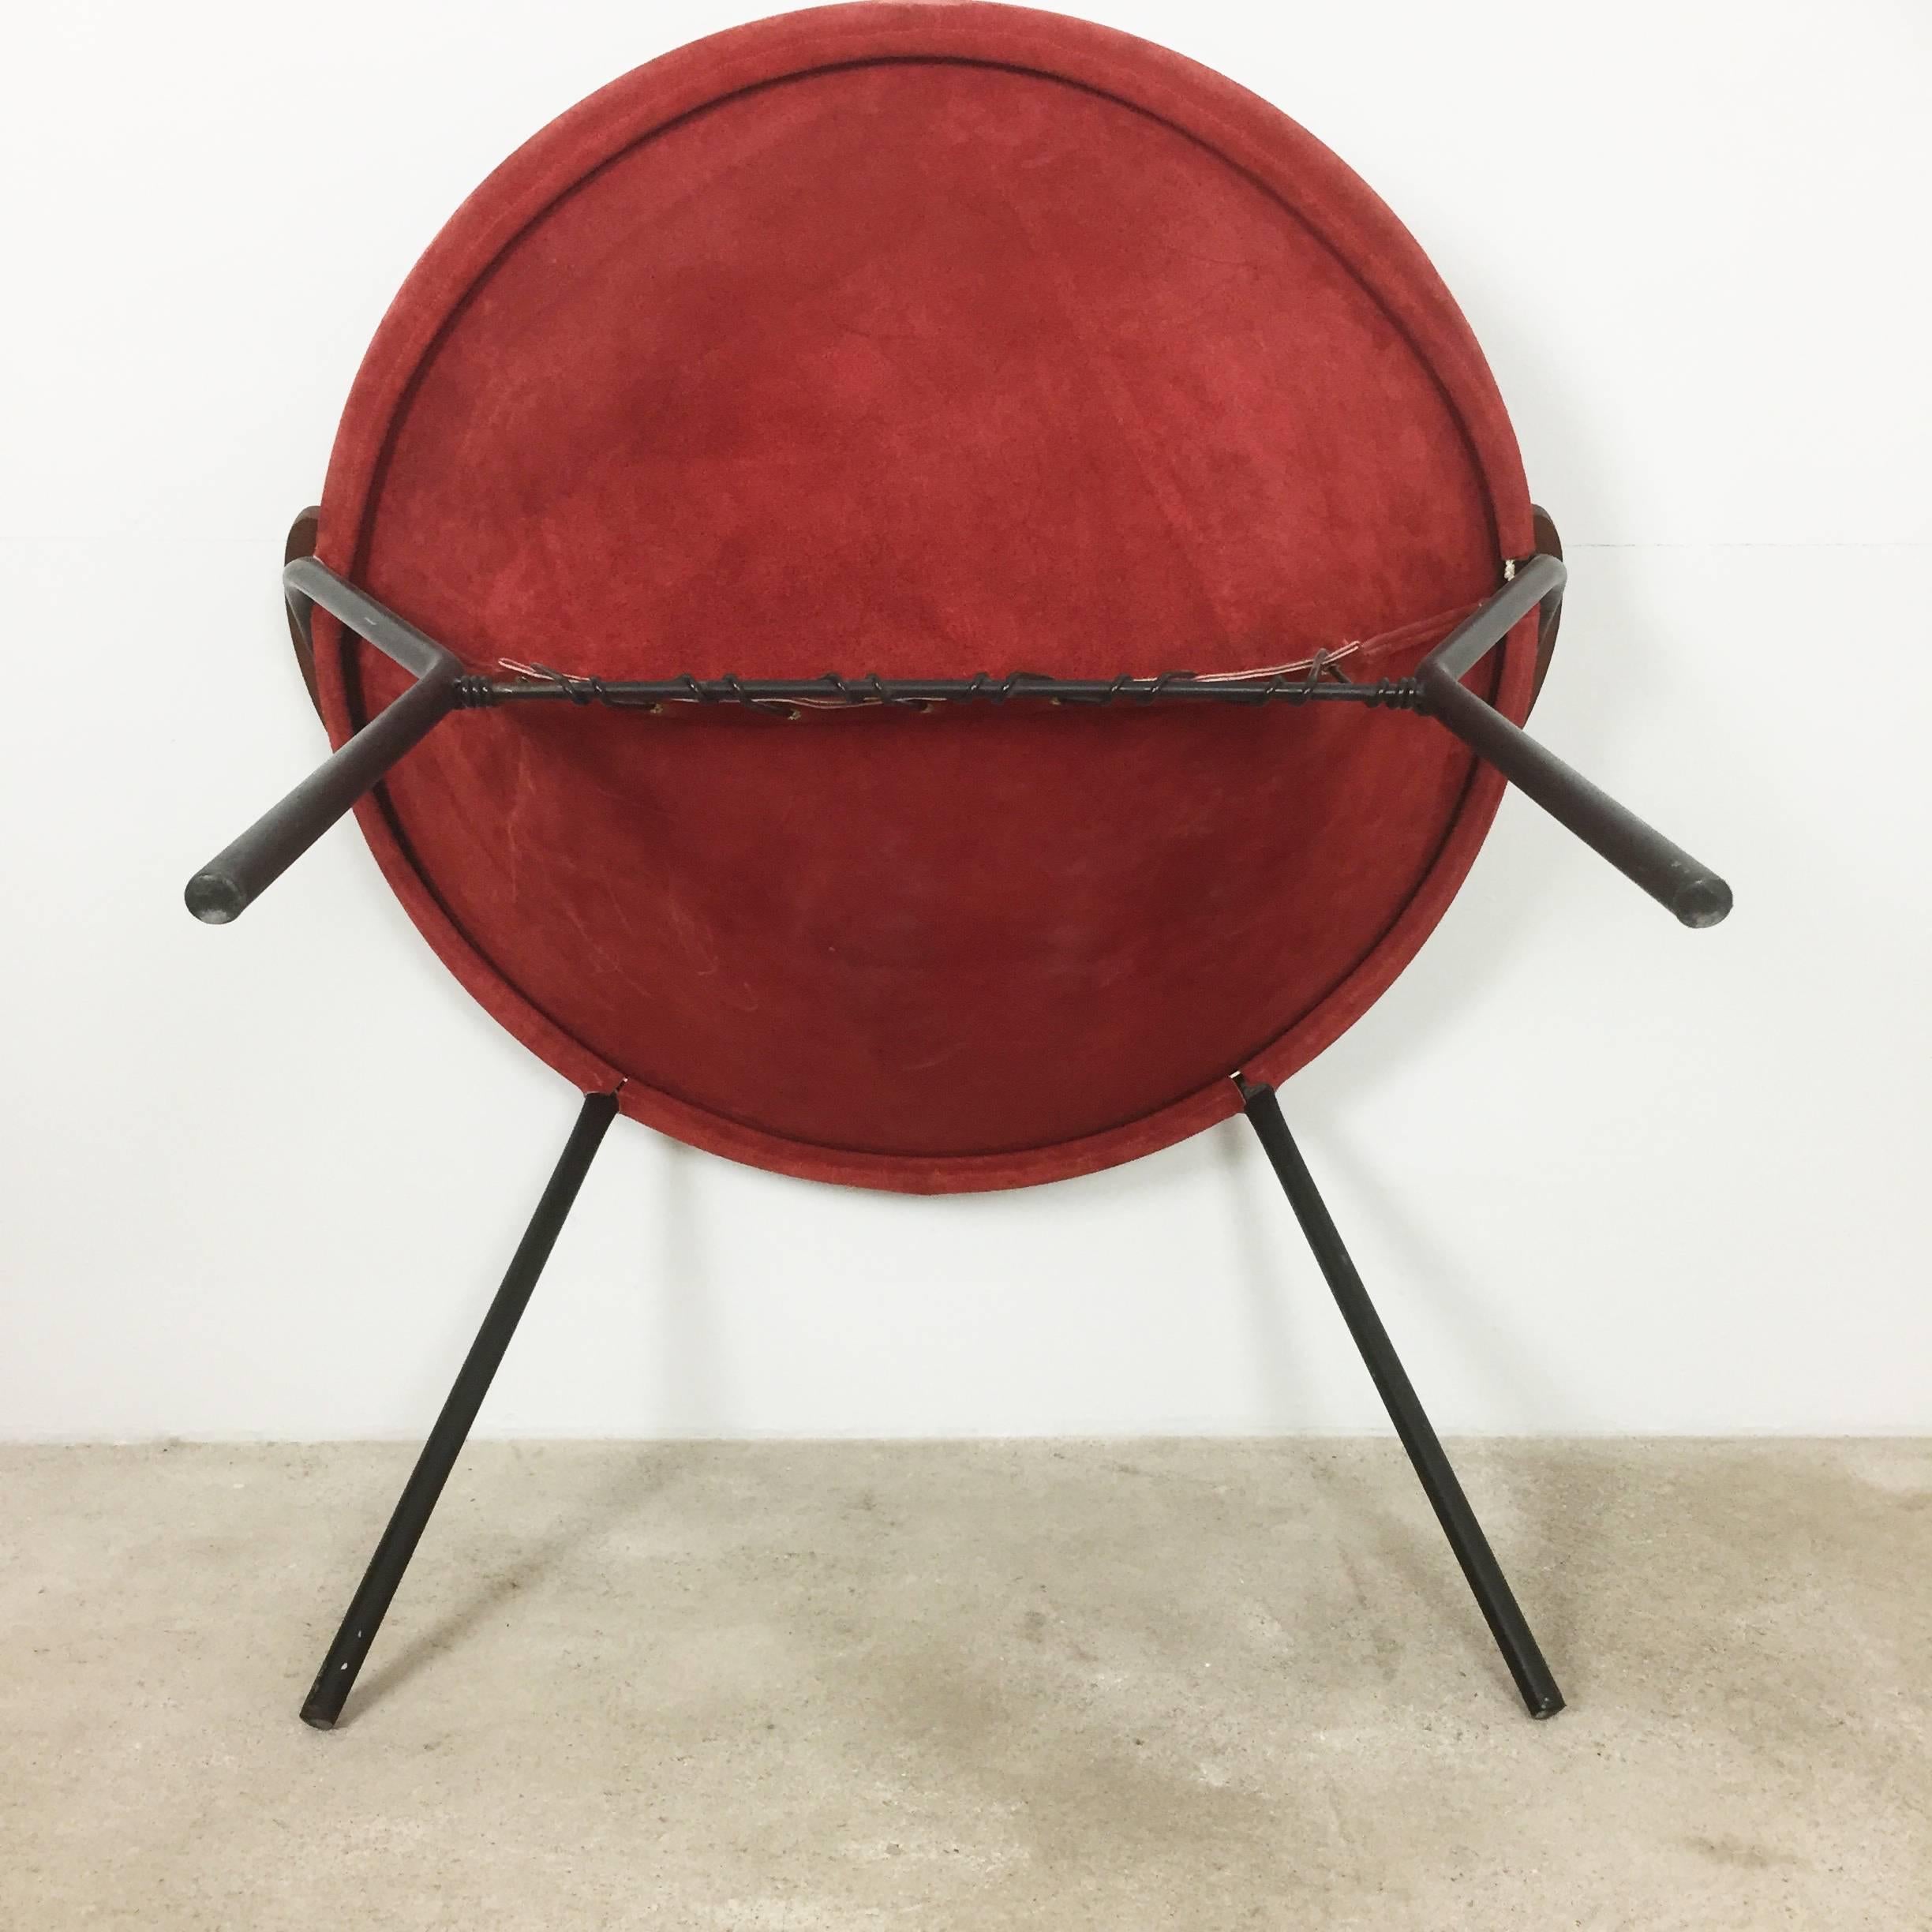 Metal Vintage 1950s Real Red Leather Balloon Easy Chair by Hans Olsen for LEA, Denmark